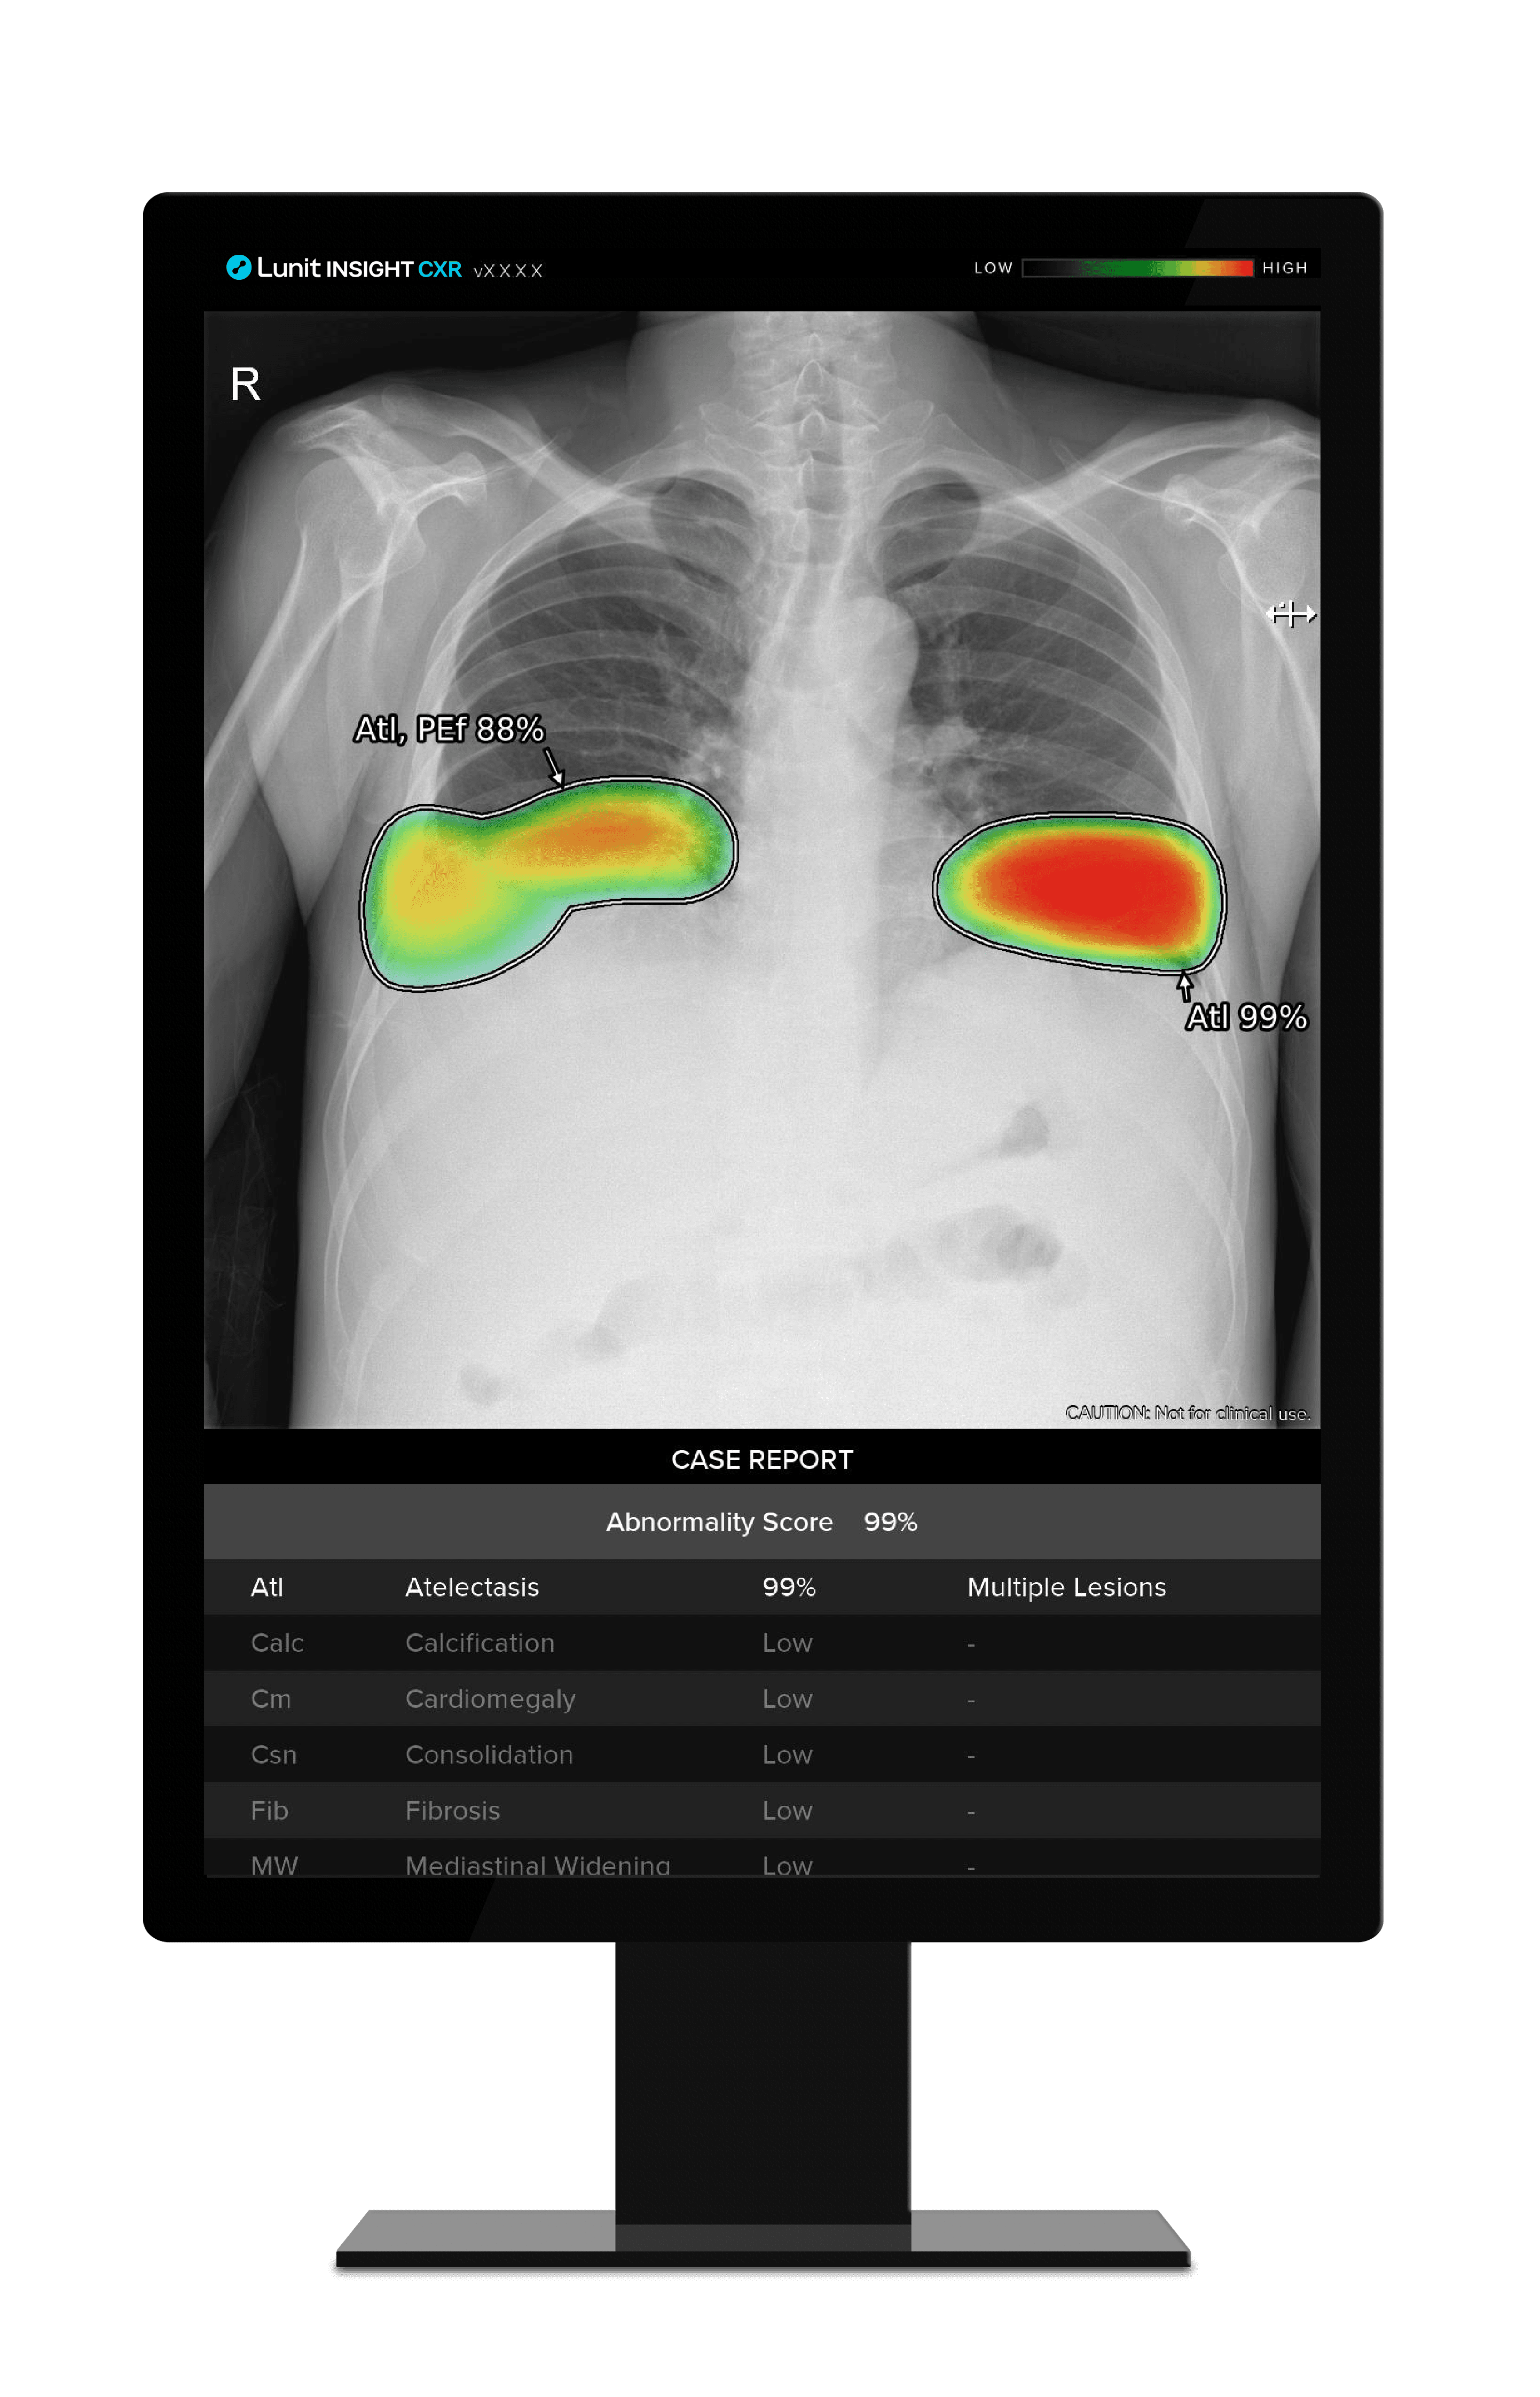 Lunit, NTT DATA Partner to Deploy AI-Powered Chest X-Ray Solution in Singapore